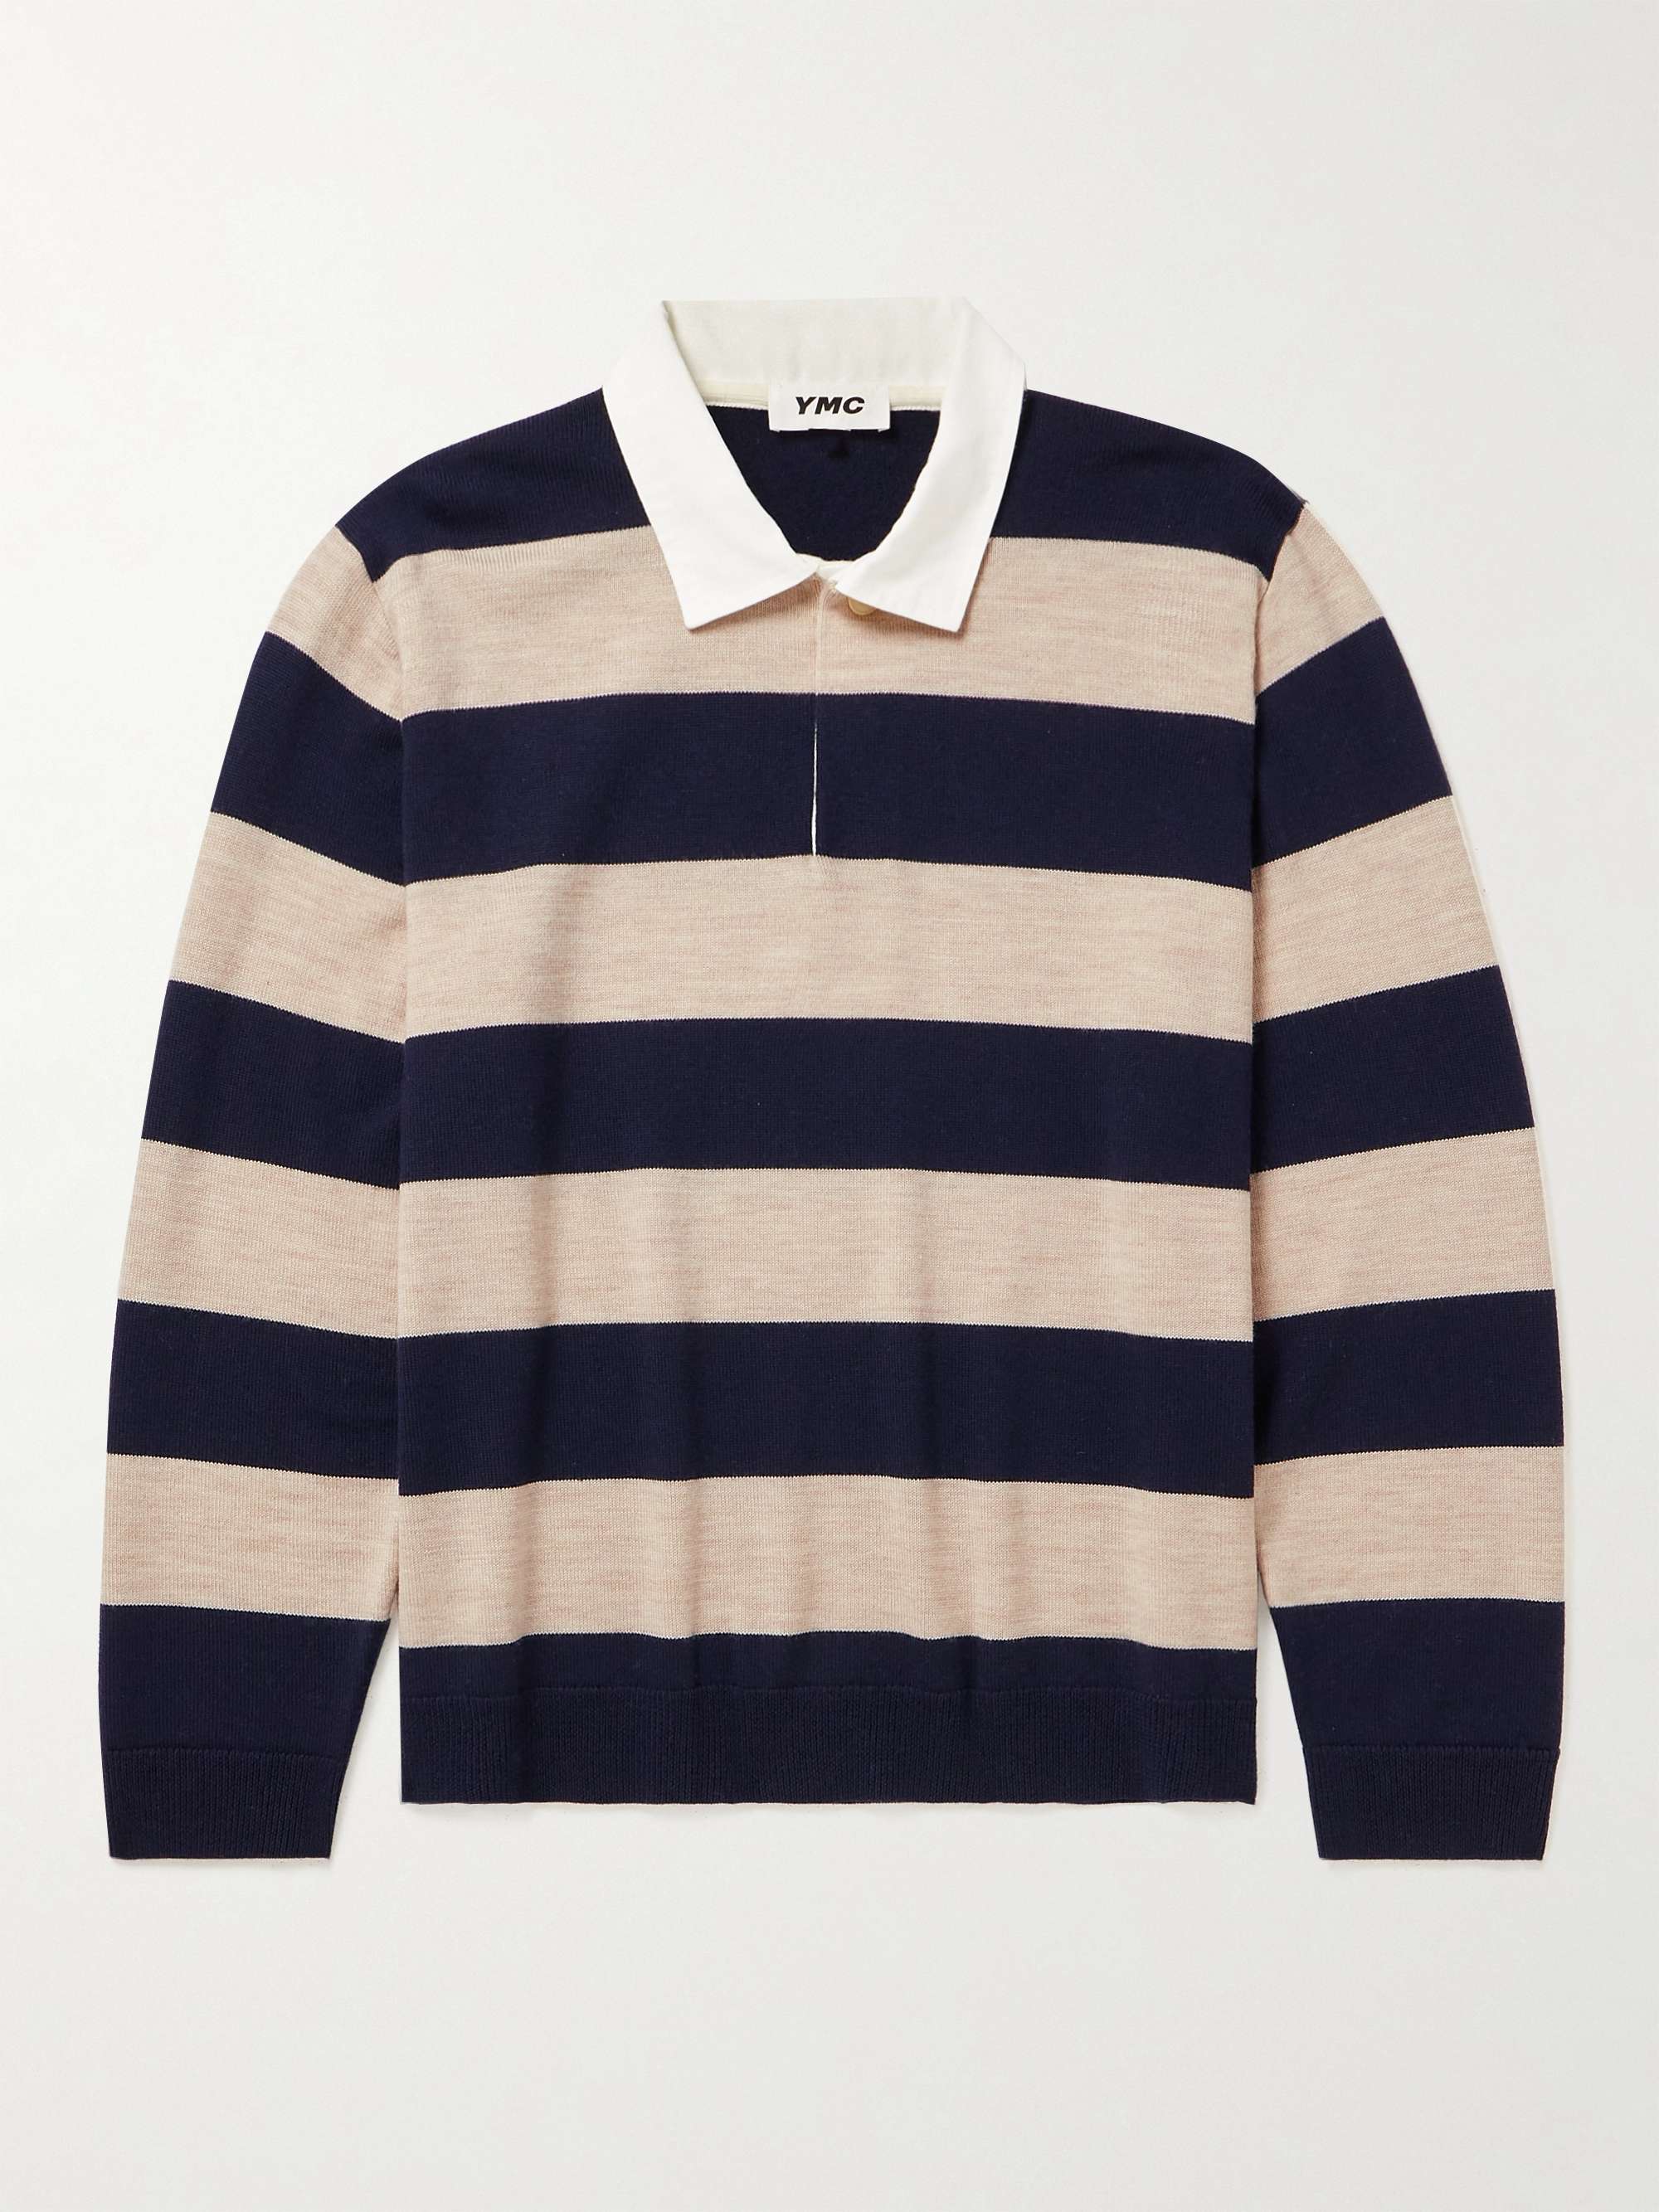 YMC Up and Under Poplin-Trimmed Striped Merino Wool Rugby Shirt